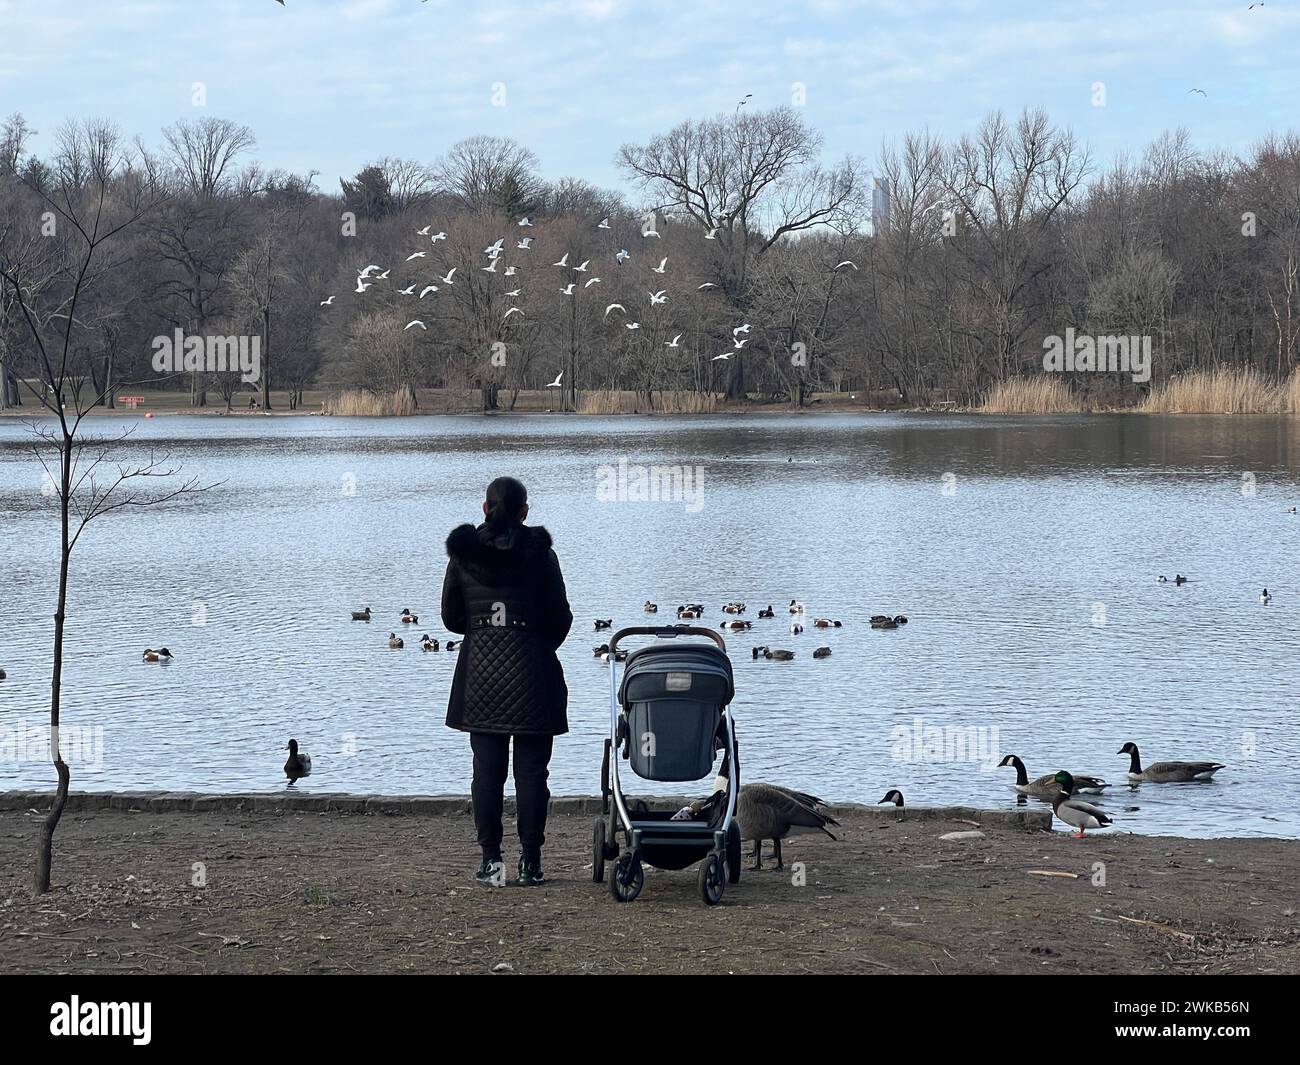 Woman with a baby  in a stroller feeds the birds along the lake in Prospect Park, Brooklyn, New York. Stock Photo